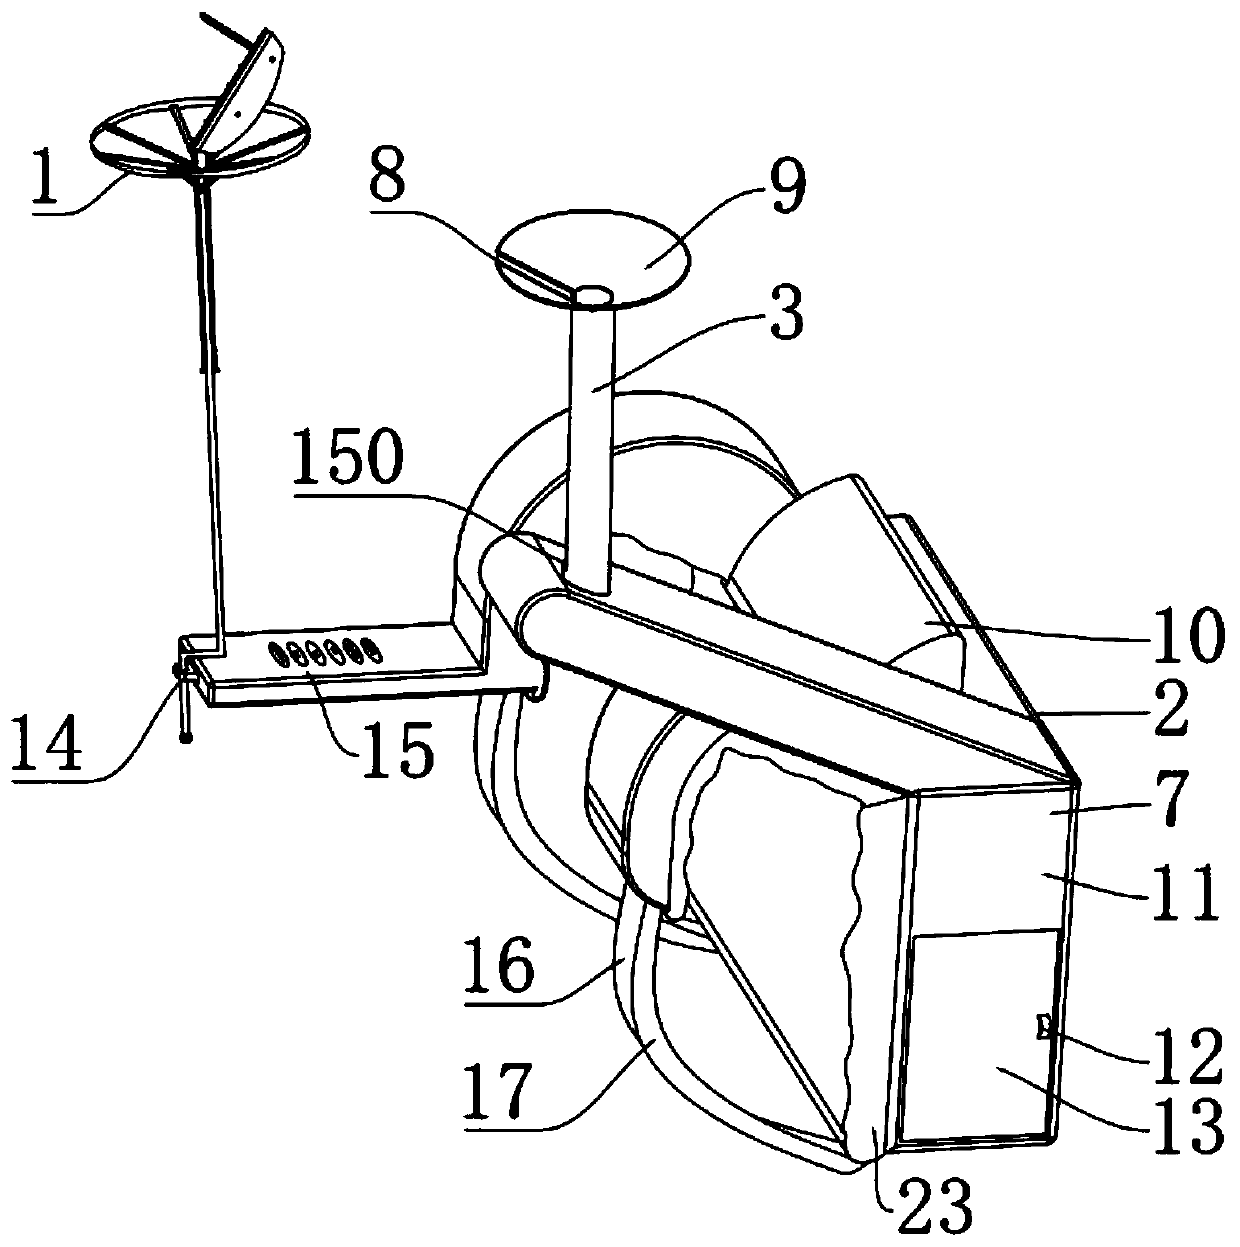 A kind of toon non-destructive full picking and binding light carrying device